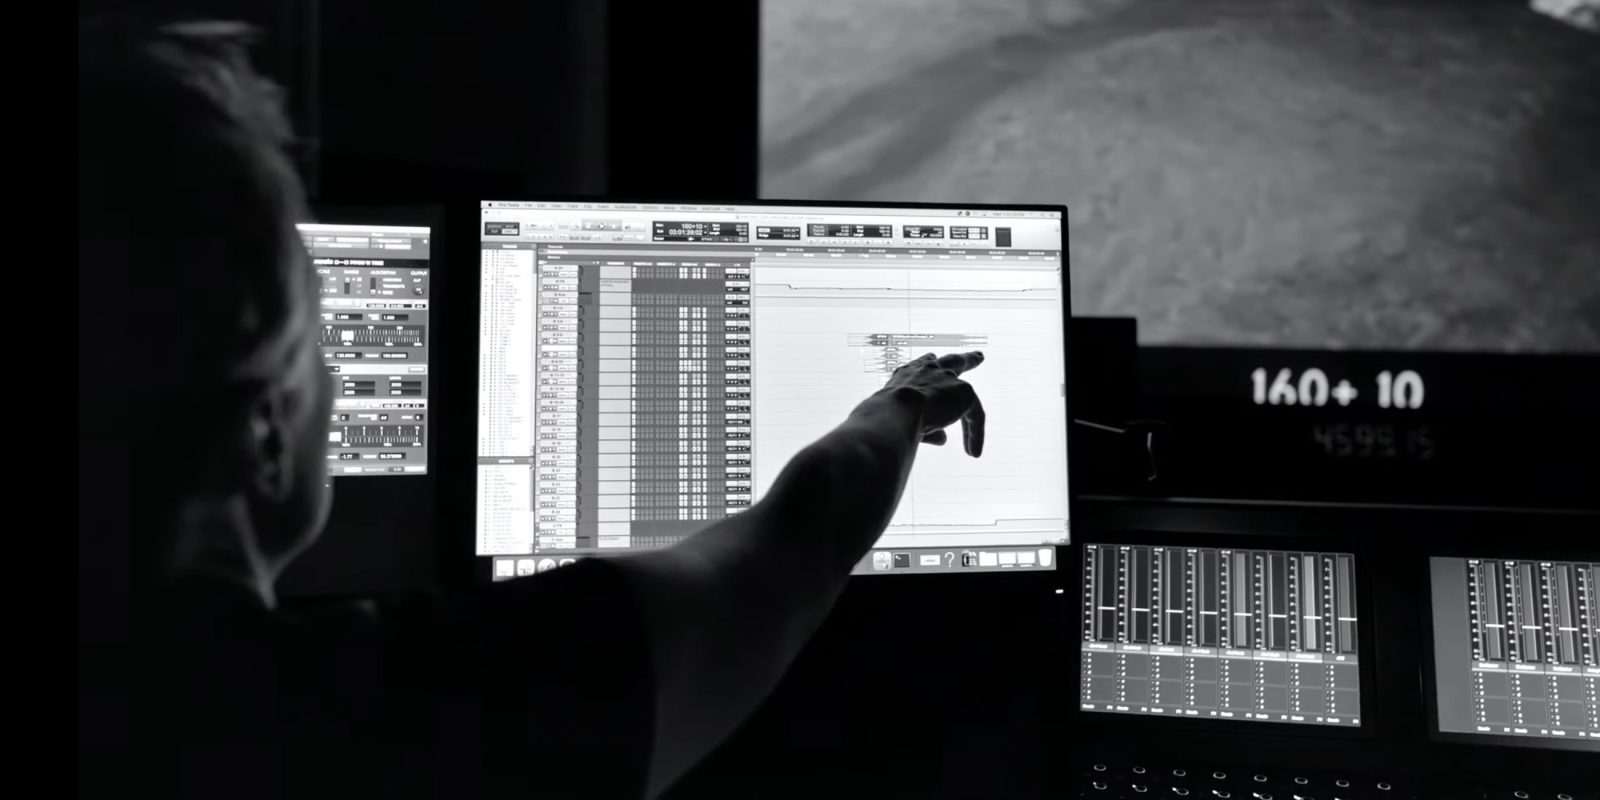 Woman points to audio tracks on a Mac as Star Wars video plays on larger screen behind | How Macs helped create the Star Wars sound design